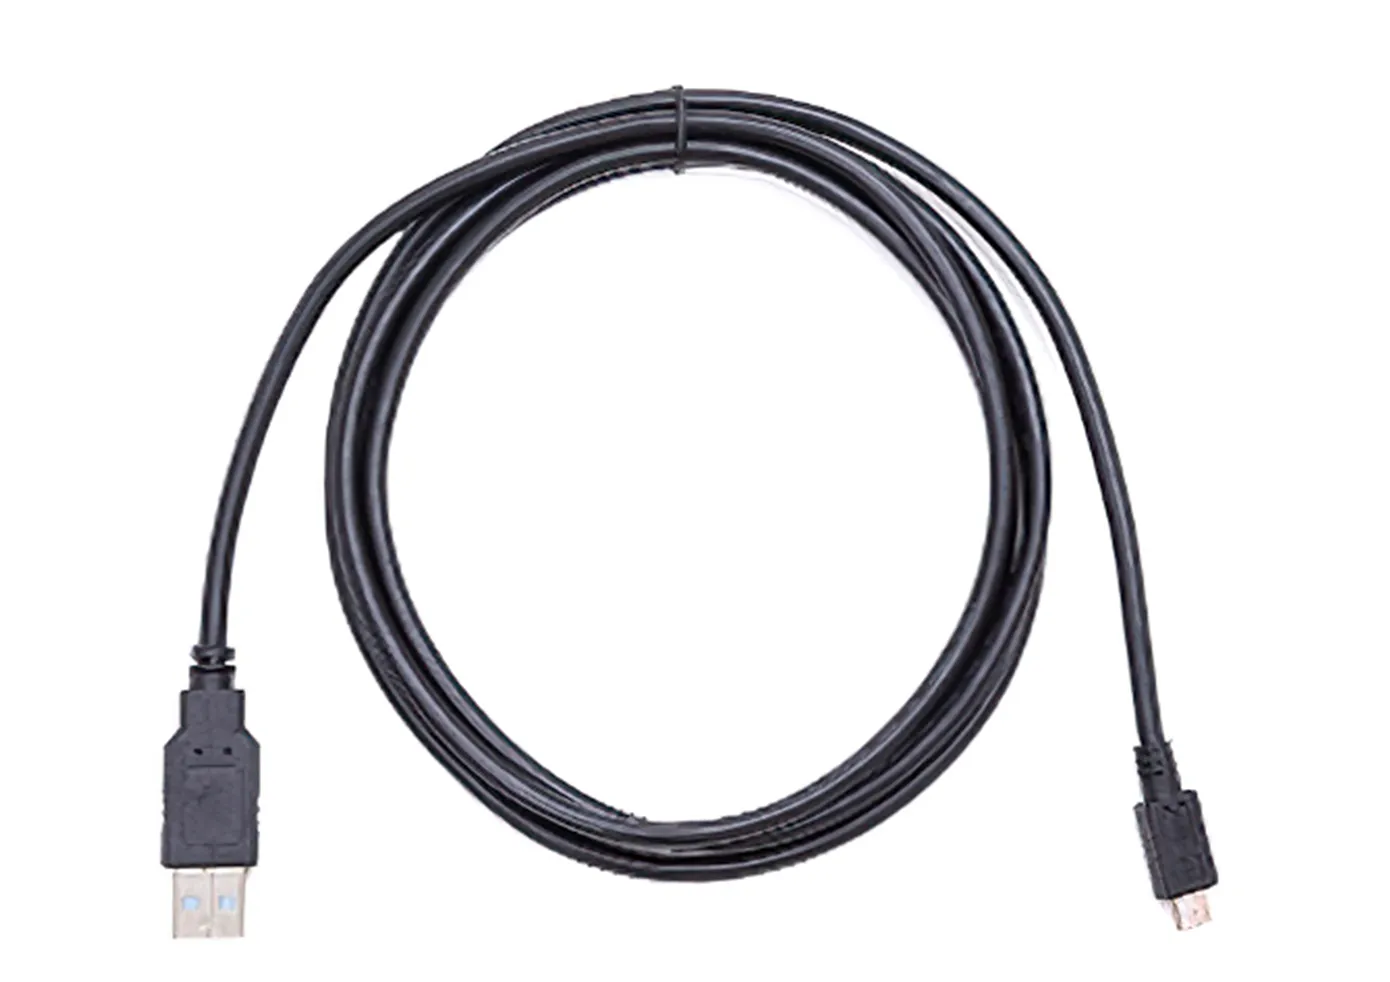  USB 2.0 Cable Type A to Micro USB B<br/>

<span class="clsSpnProdMdls"></span>